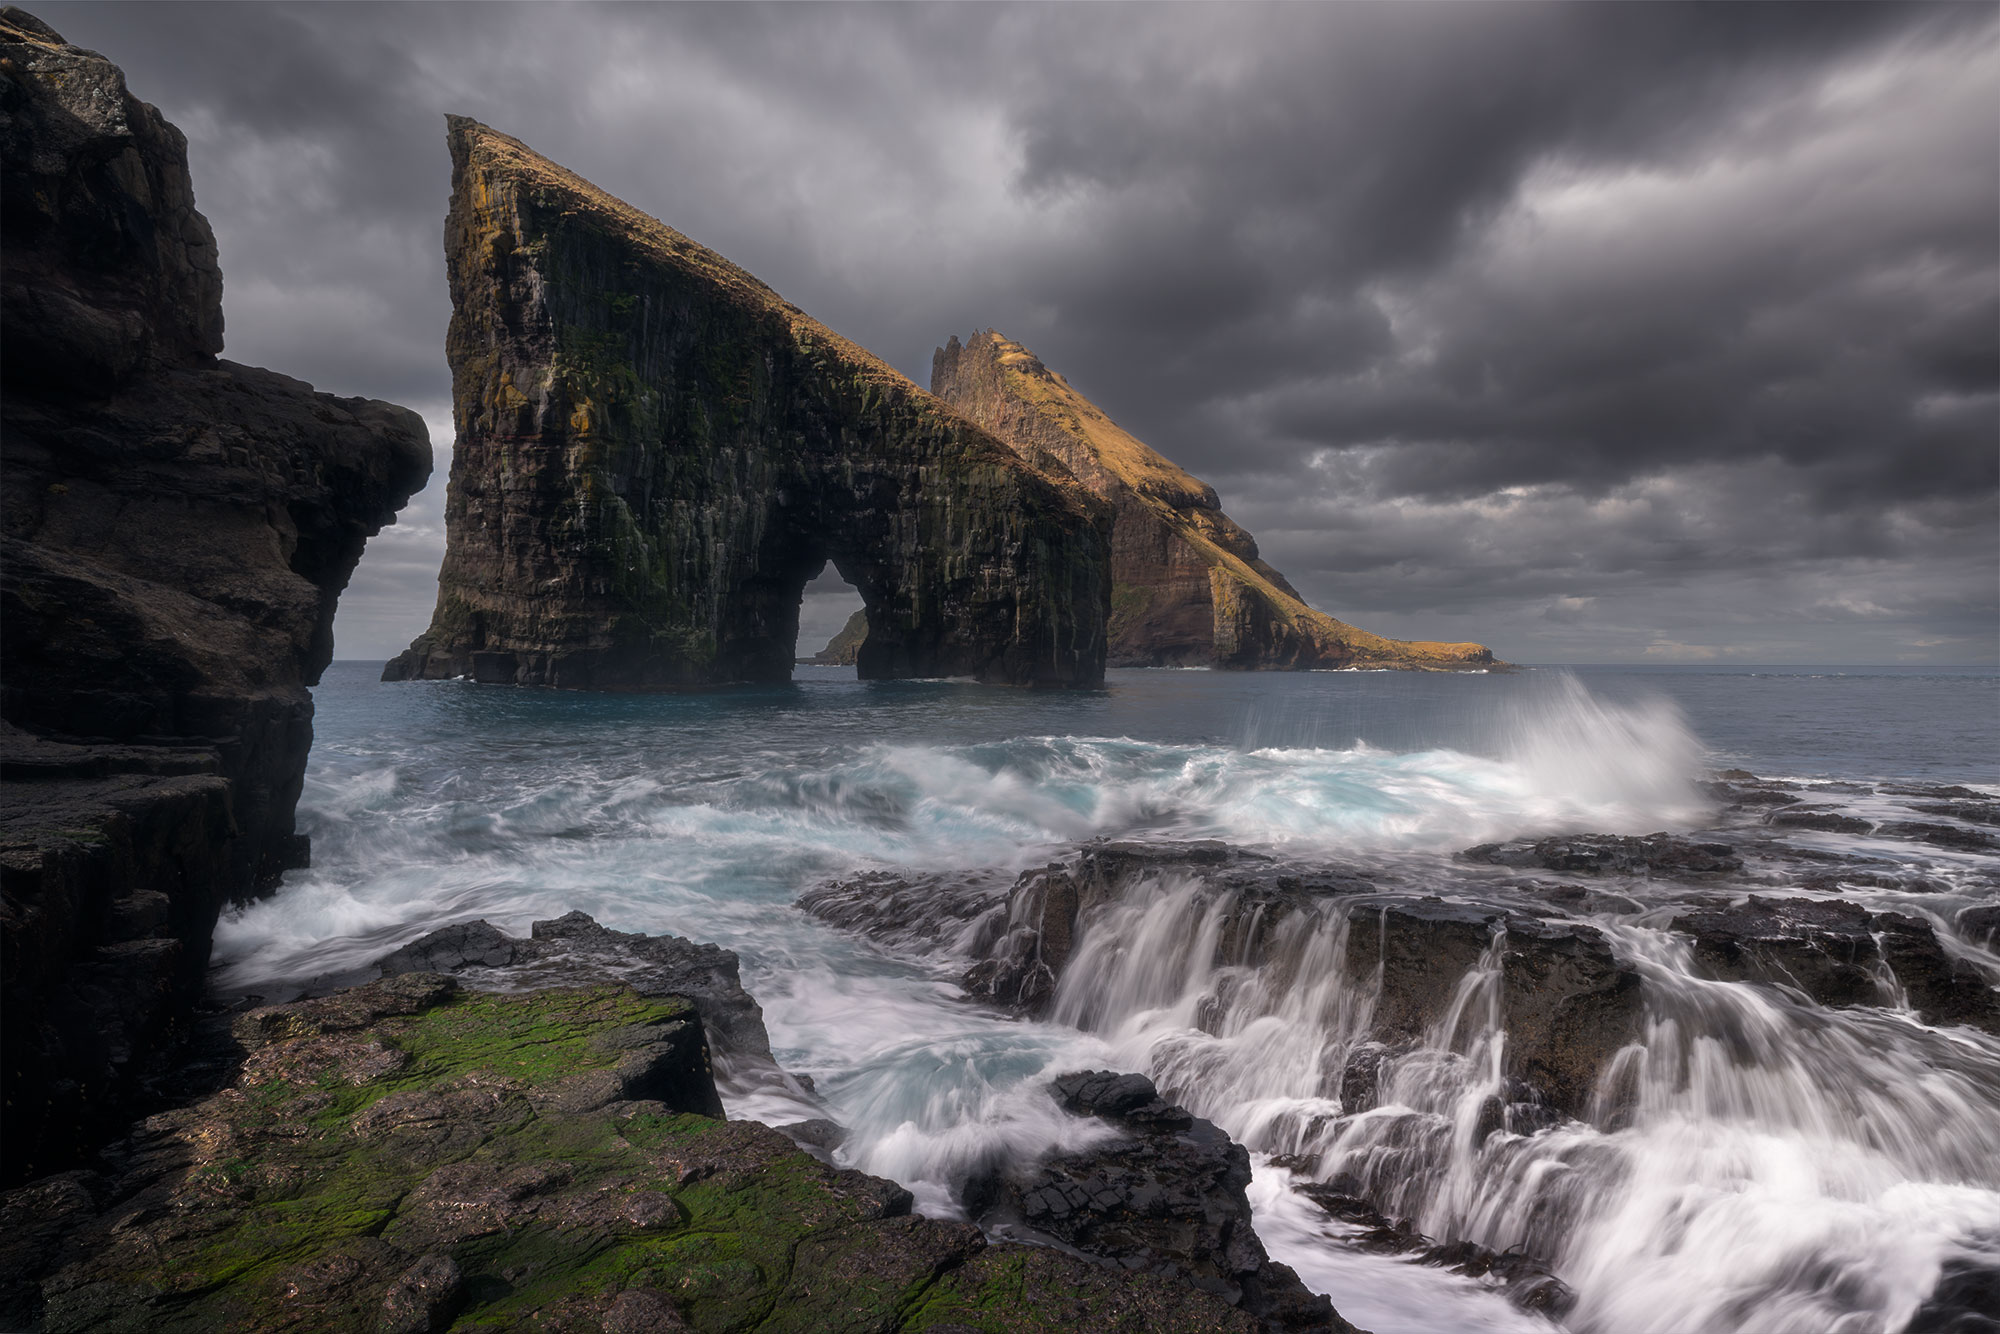 Indulge in the mesmerizing beauty of the Faroe Islands with captivating landscape photography, showcasing the iconic Drangarnir sea stacks as seen from Vágar Island. This stunning long exposure shot, expertly captured by photographer Jennifer Esseiva, brings to life the rugged charm and dramatic allure of this remote seascape.